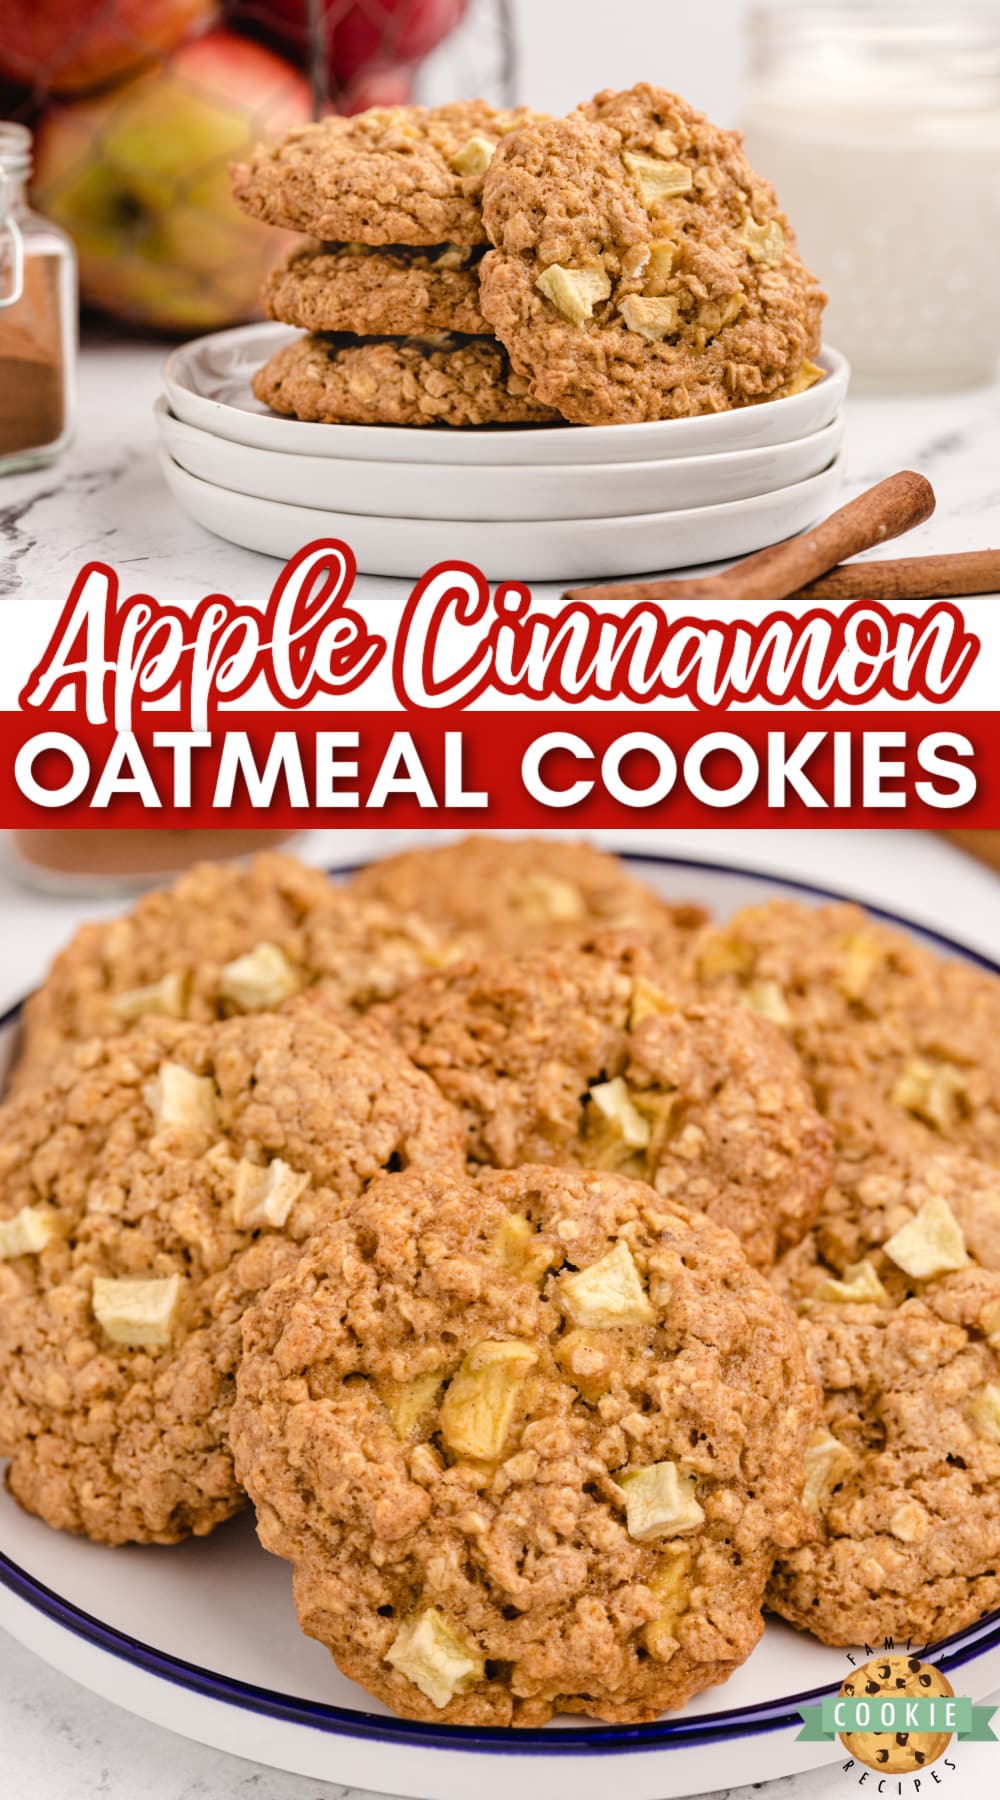 Apple Cinnamon Oatmeal Cookies made with a cake mix, fresh apples, applesauce and a few other basic ingredients. Delicious cake mix cookie recipe that tastes like apple pie! via @buttergirls